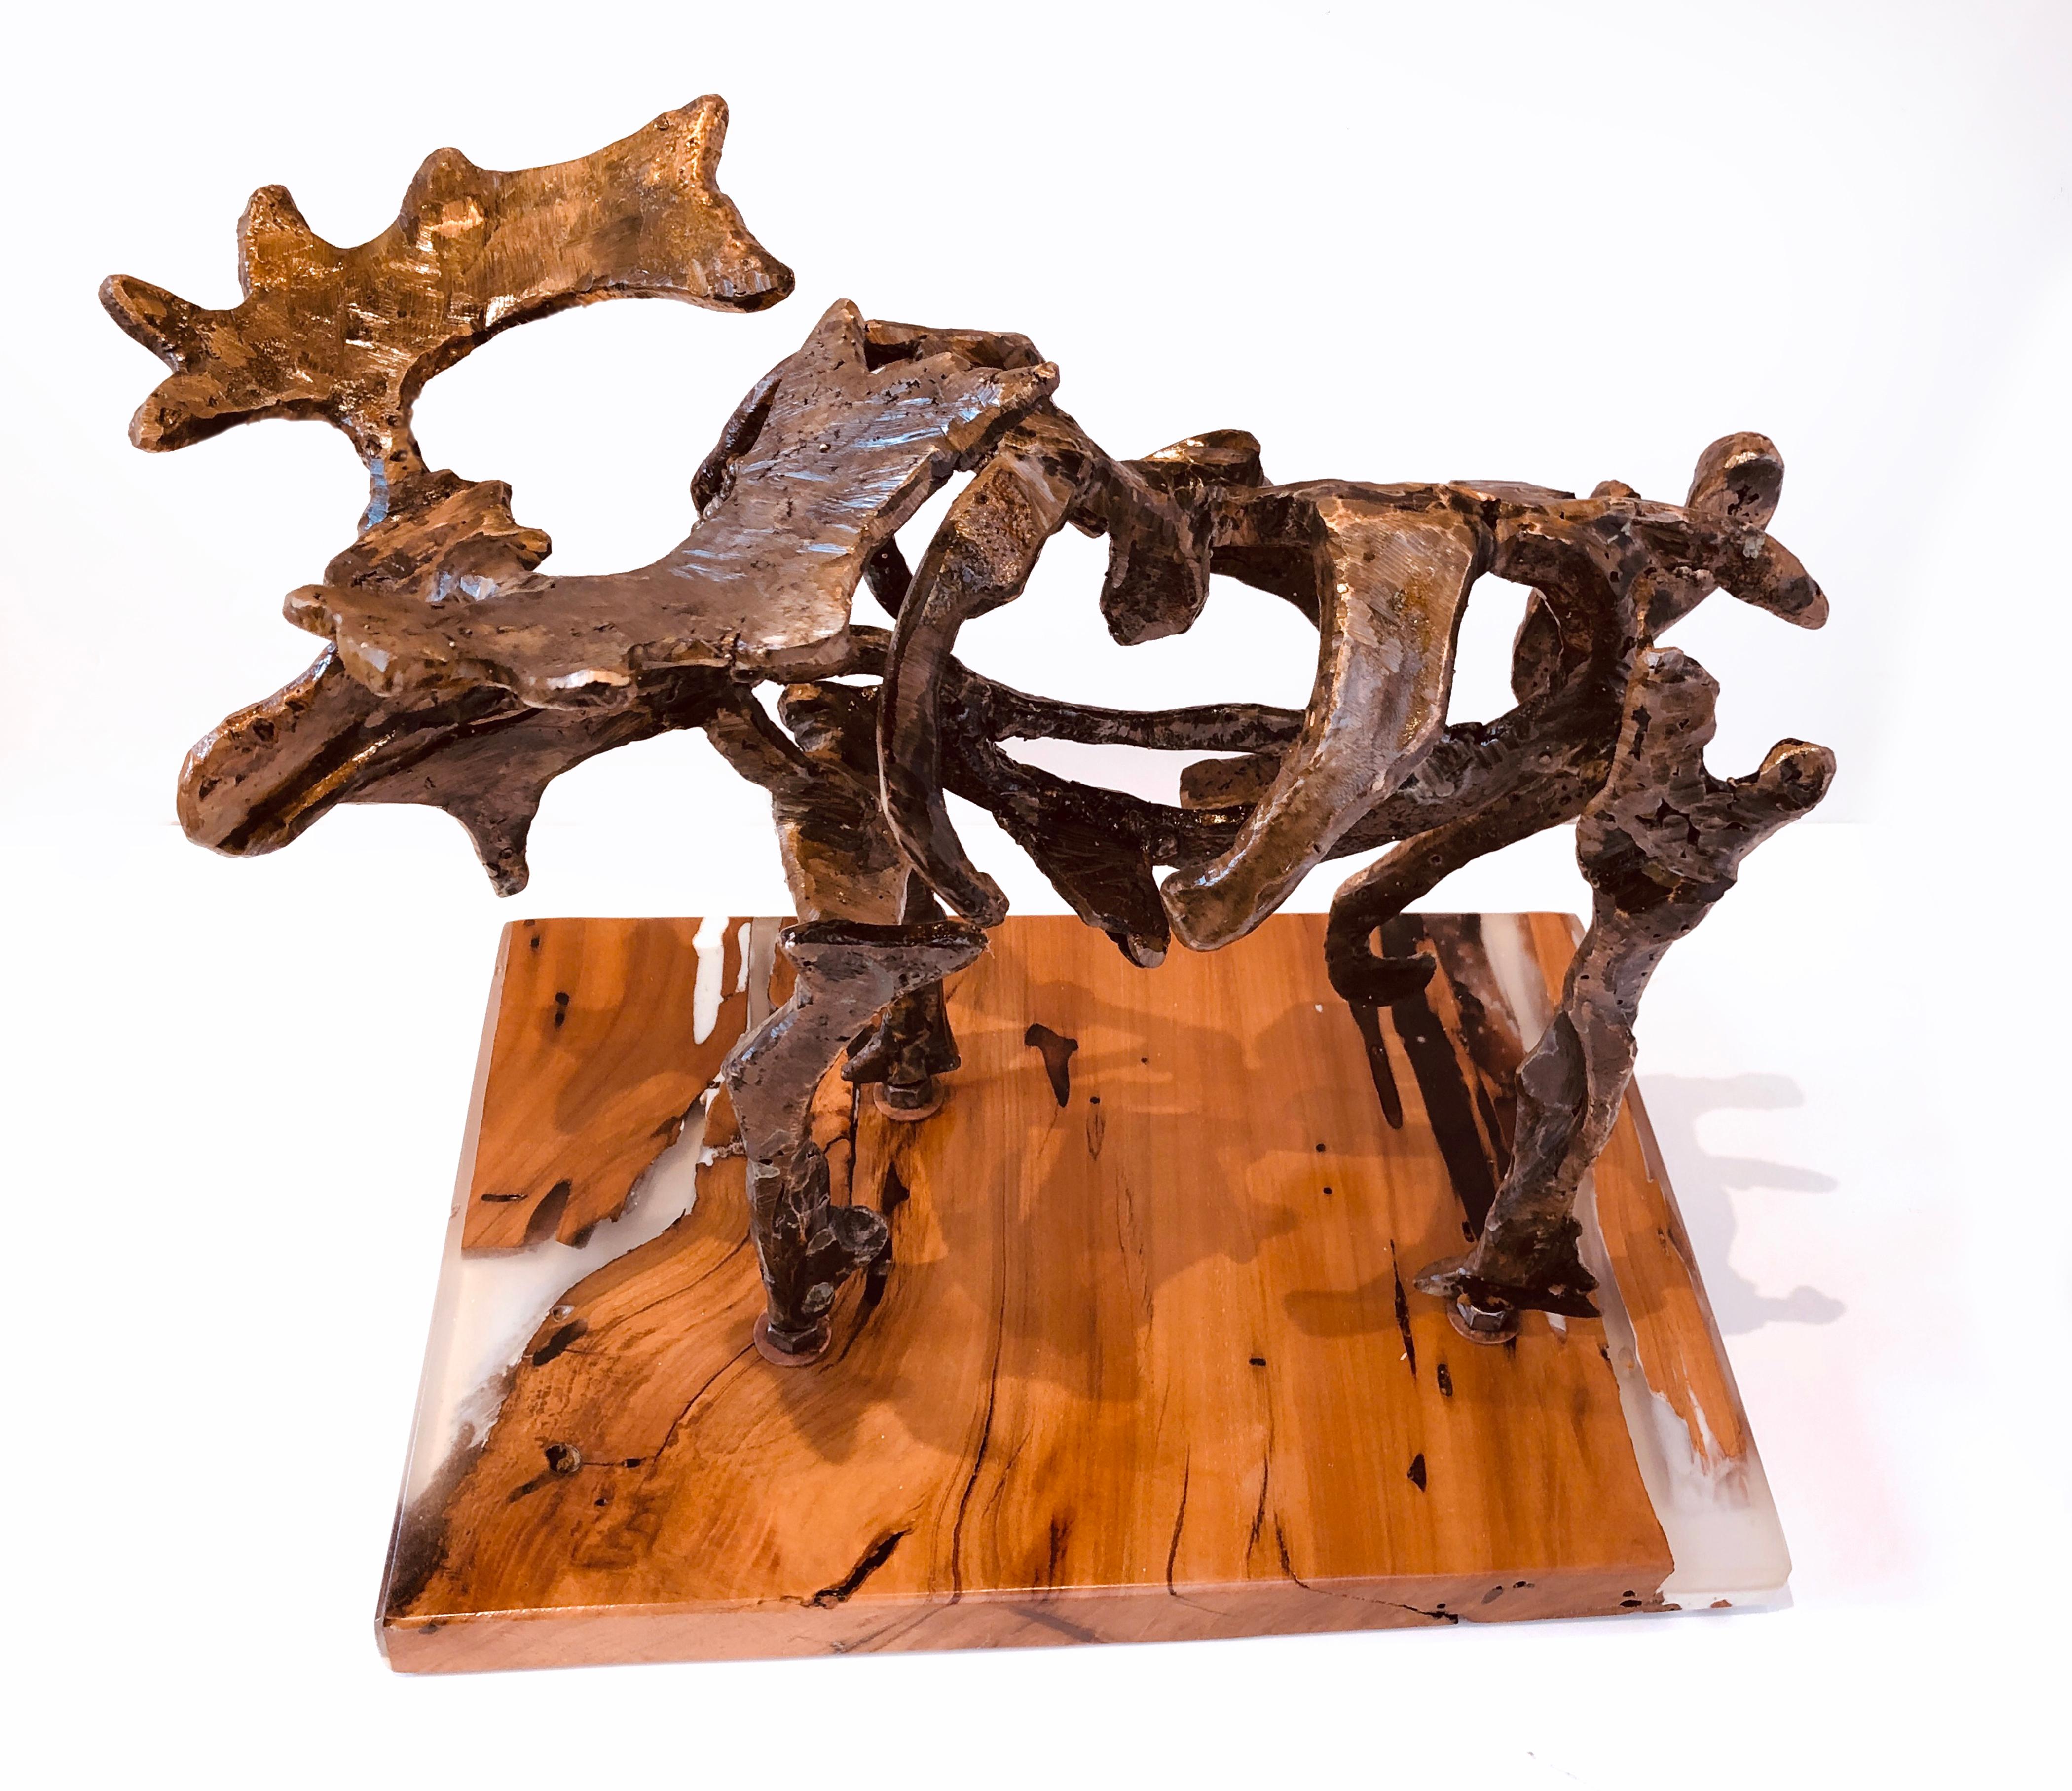 Moose #4 (Bronze, texture, majestic, strength, nature, tabletop)  - Sculpture by Simon Winegar